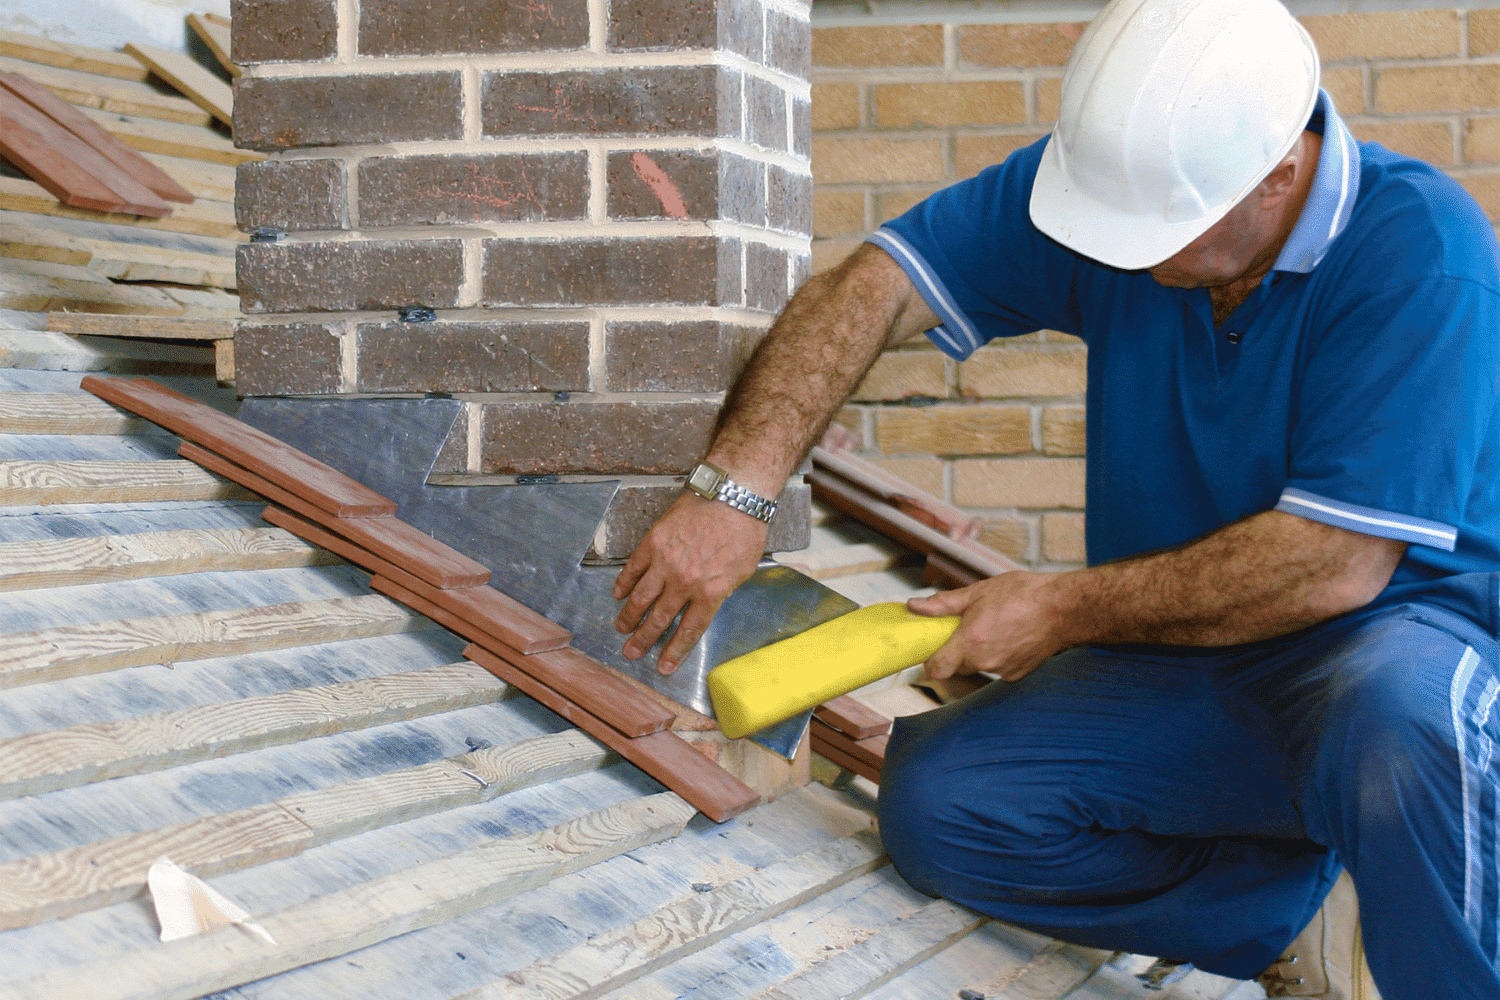 Illustration of a professional roofer inspecting and maintaining roof flashing